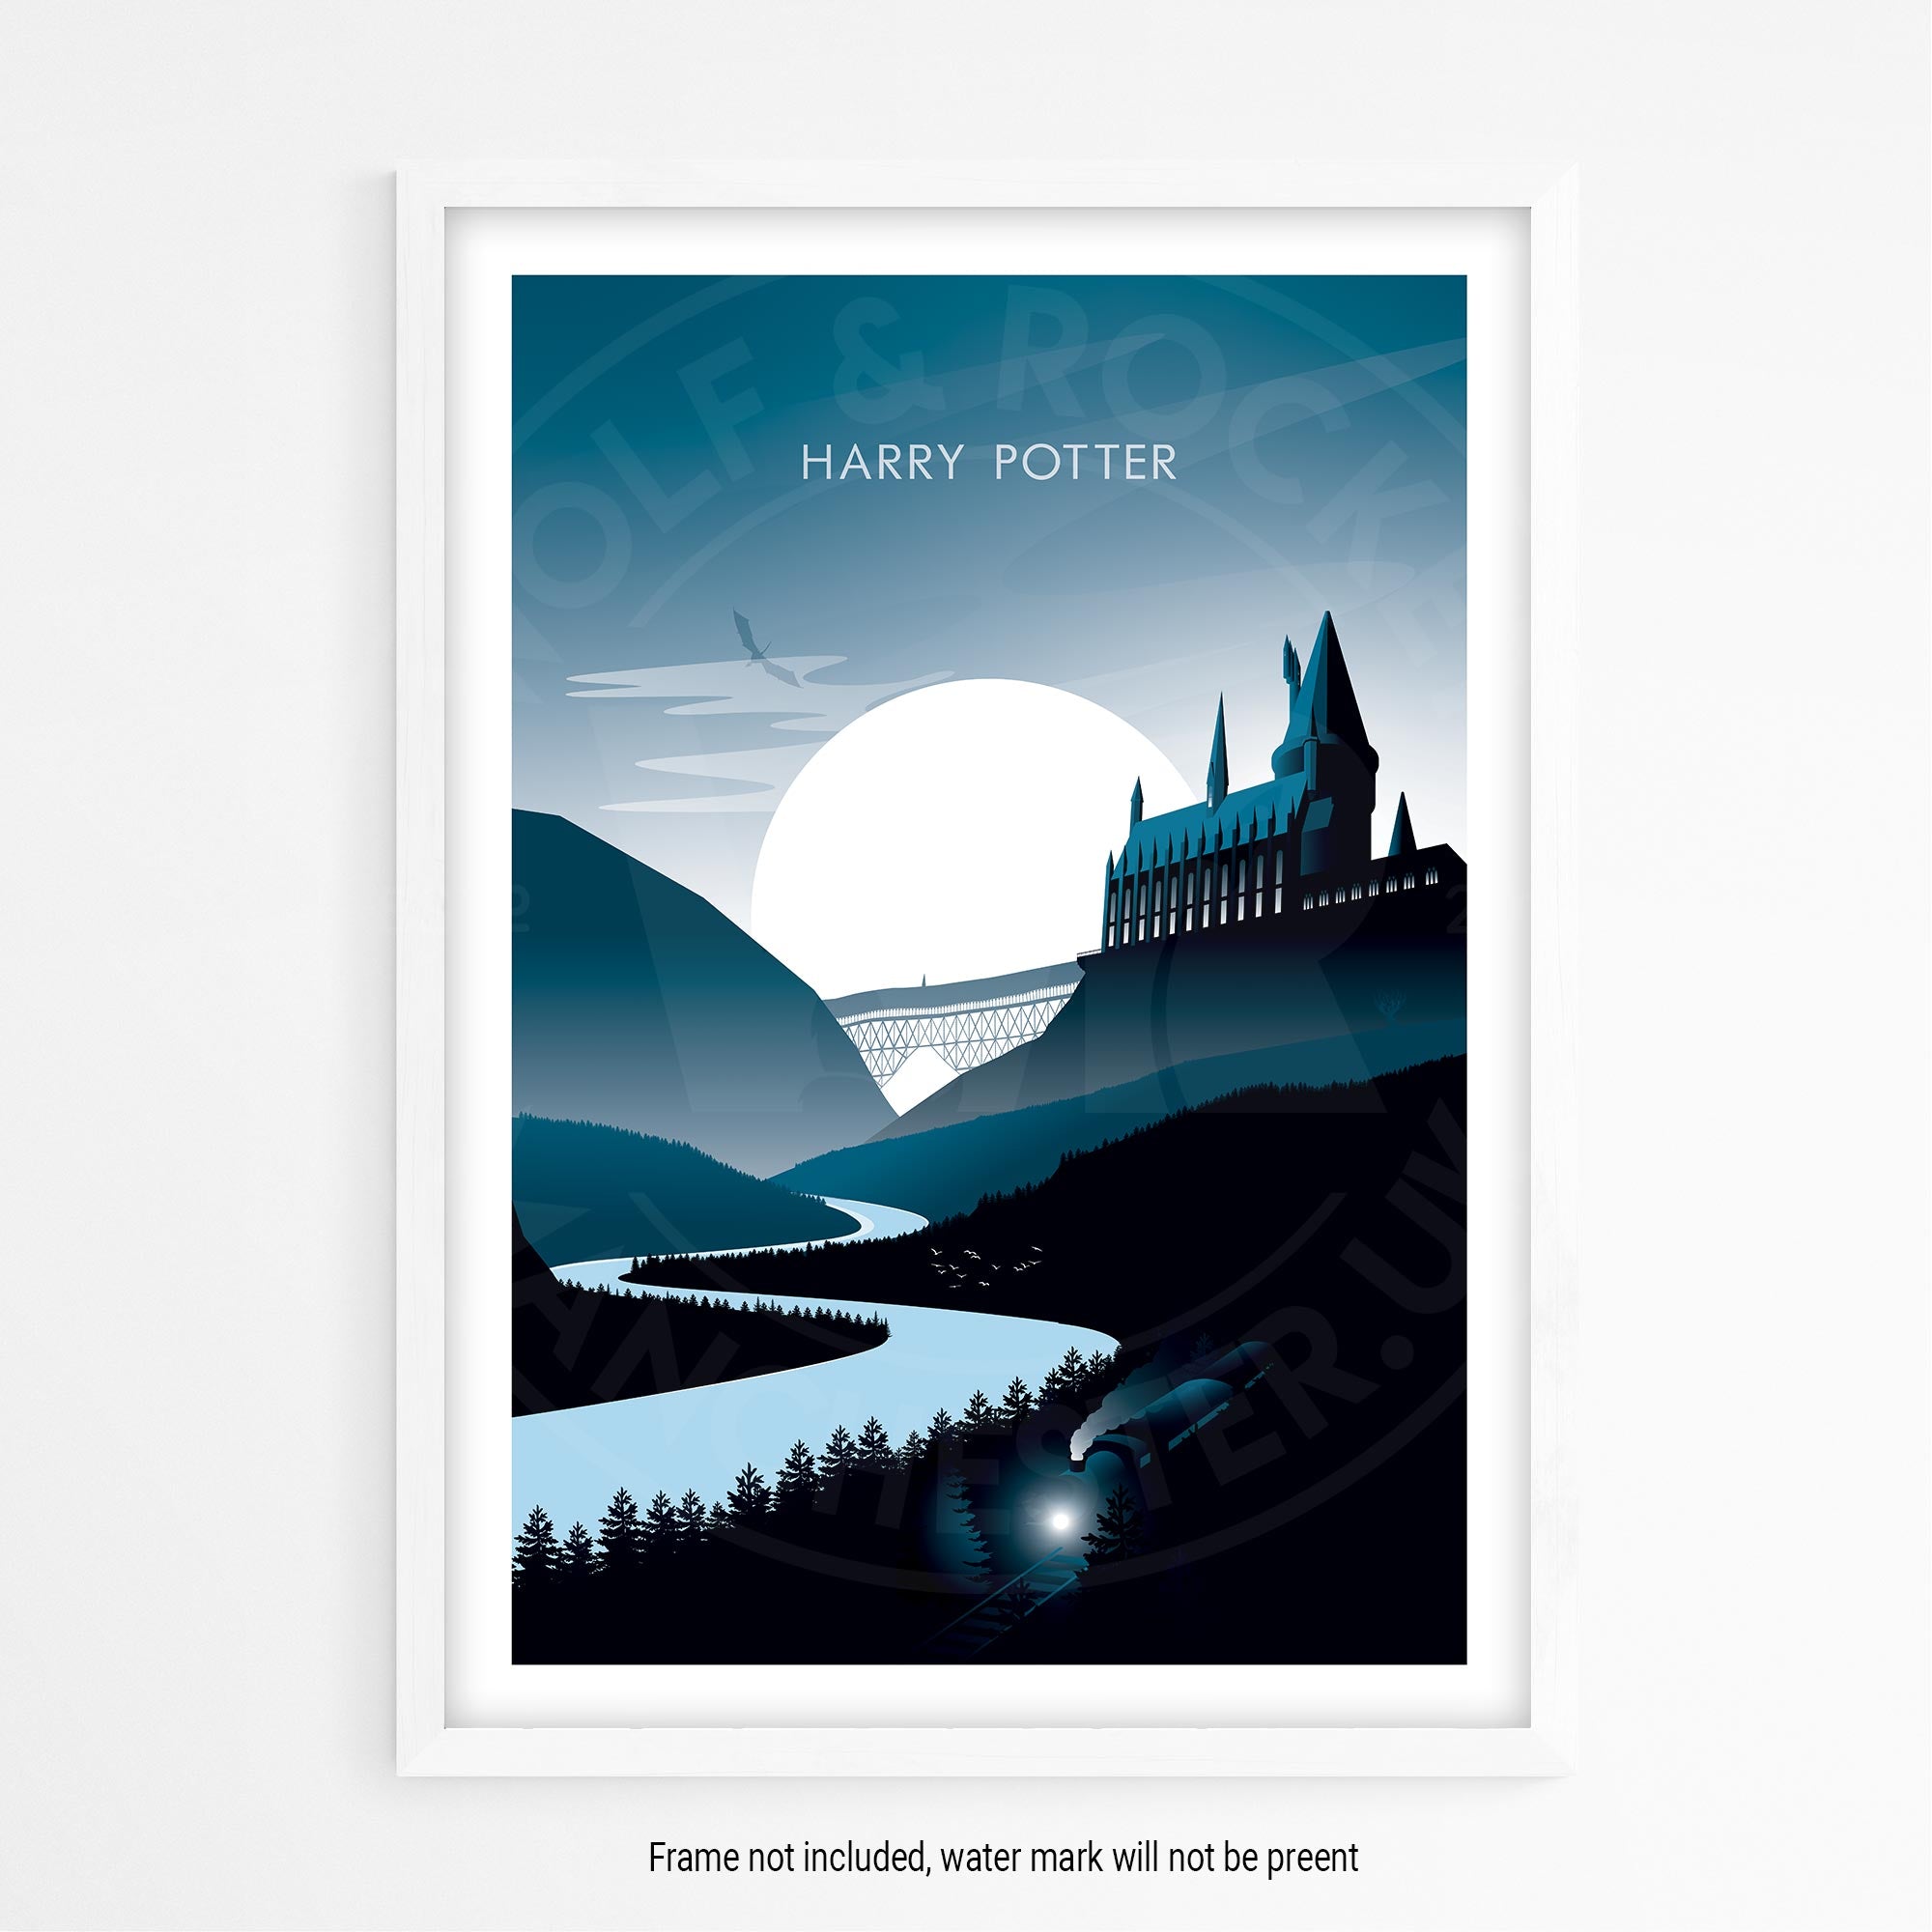 Harry Potter Movie Poster - Wolf and Rocket